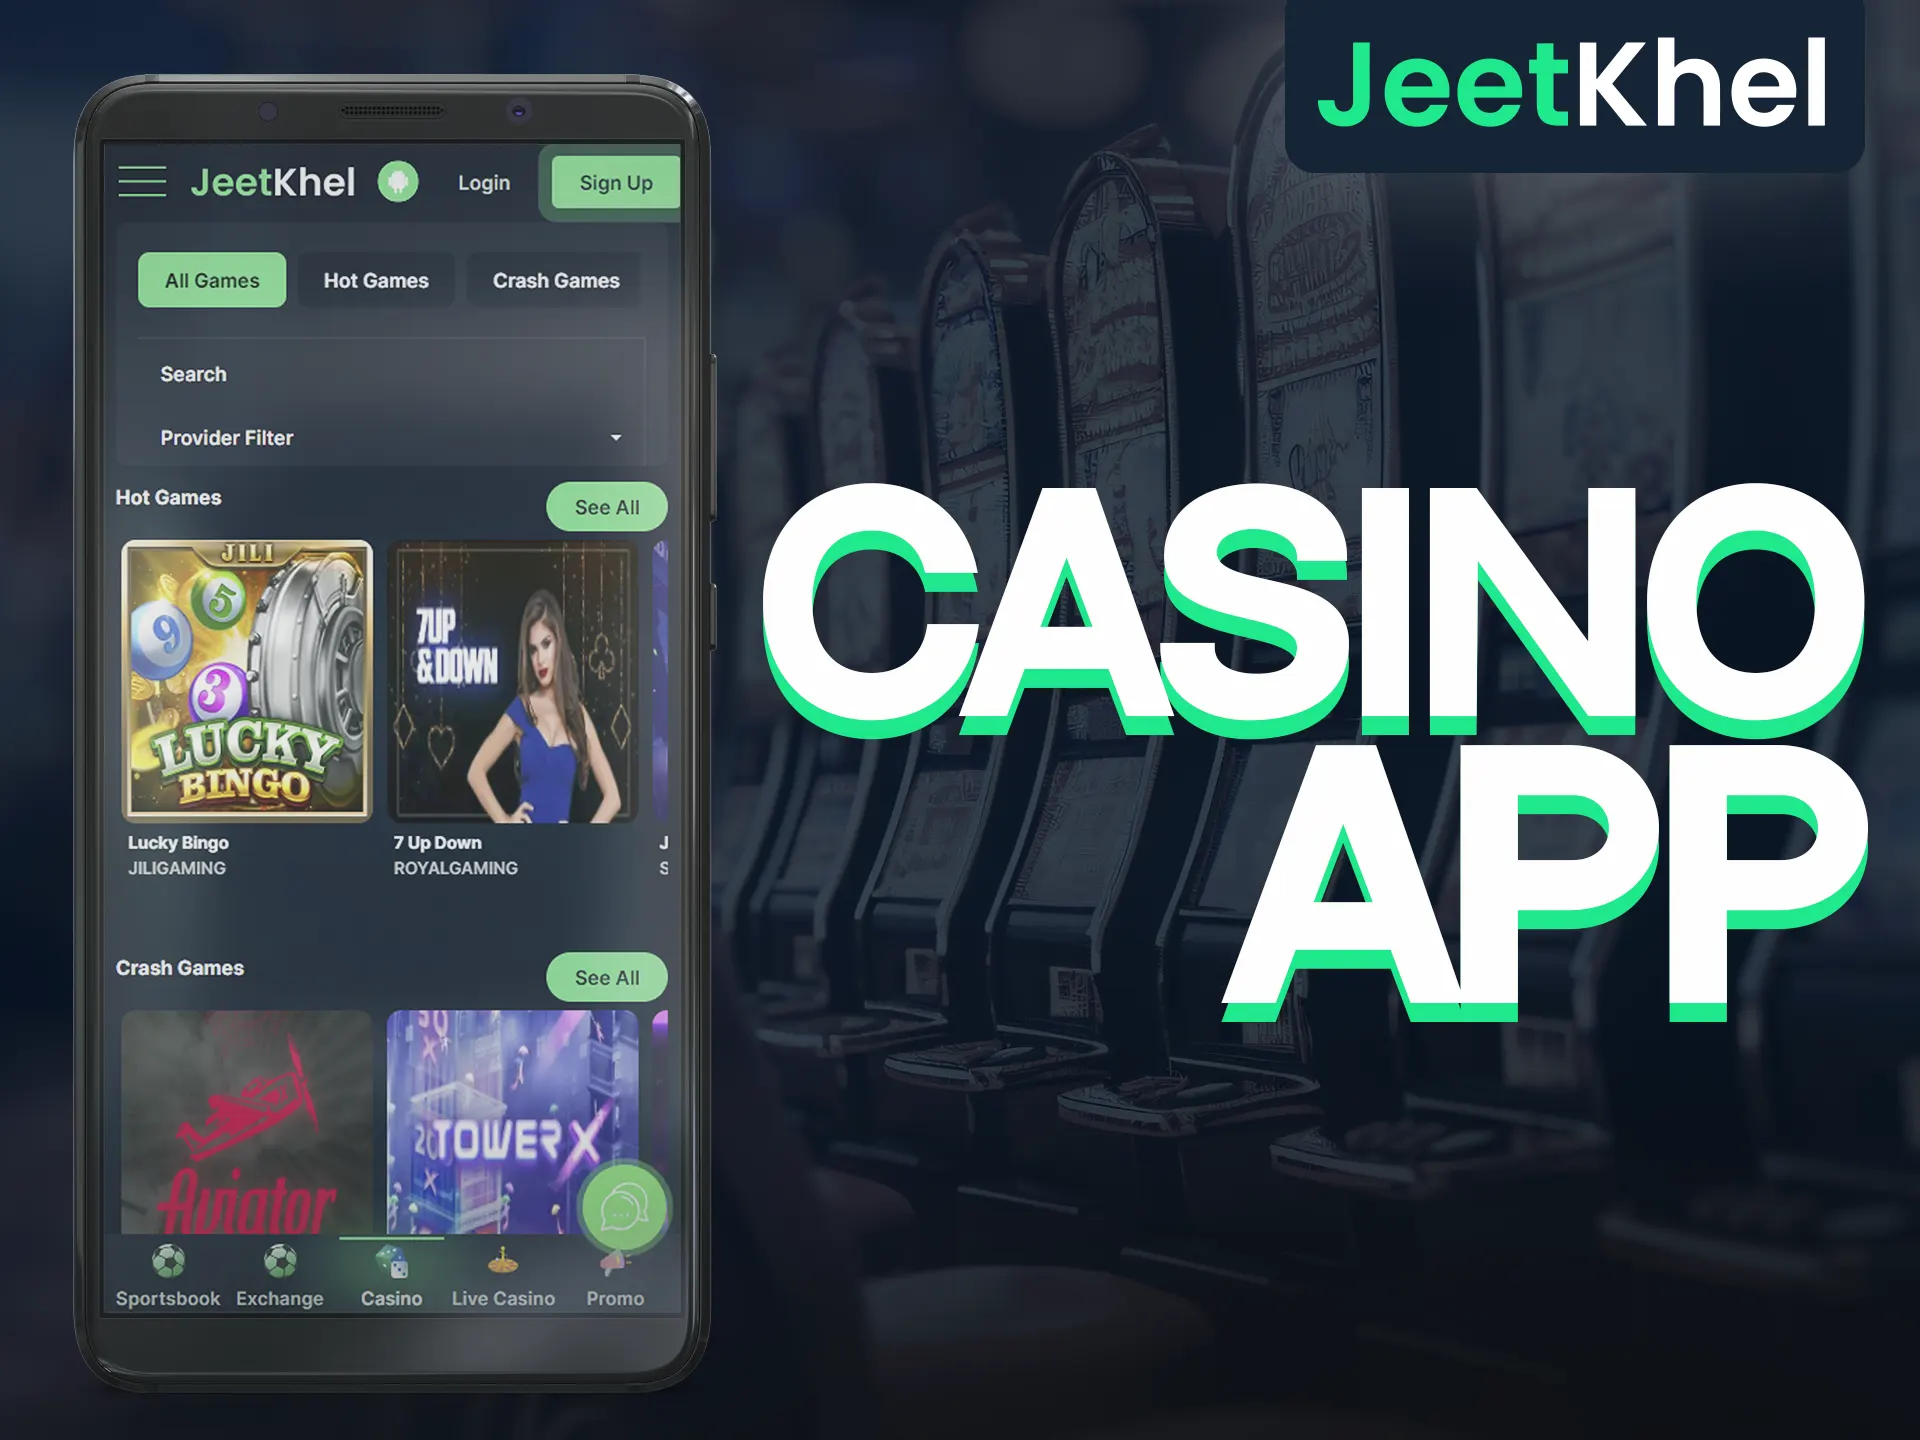 Check out the most popular Jeetkhel casino games.